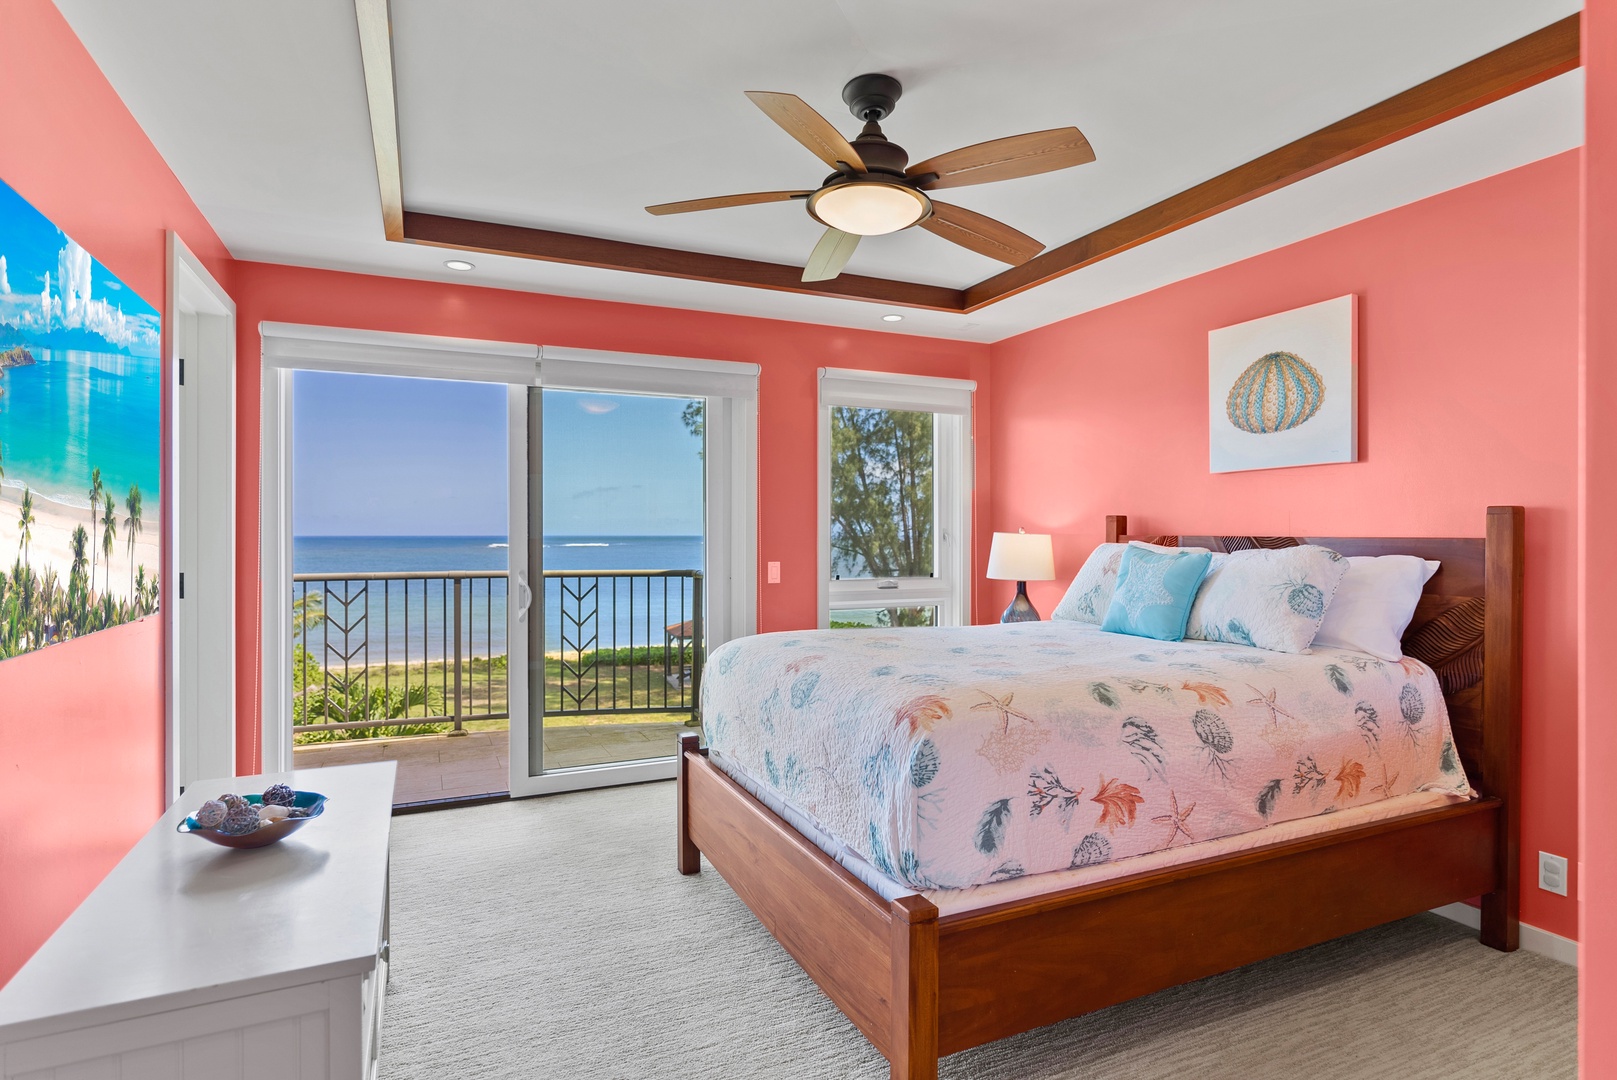 Waialua Vacation Rentals, Kala'iku Main - Junior primary suite with pillow-top queen bed and balcony with view of pool and ocean